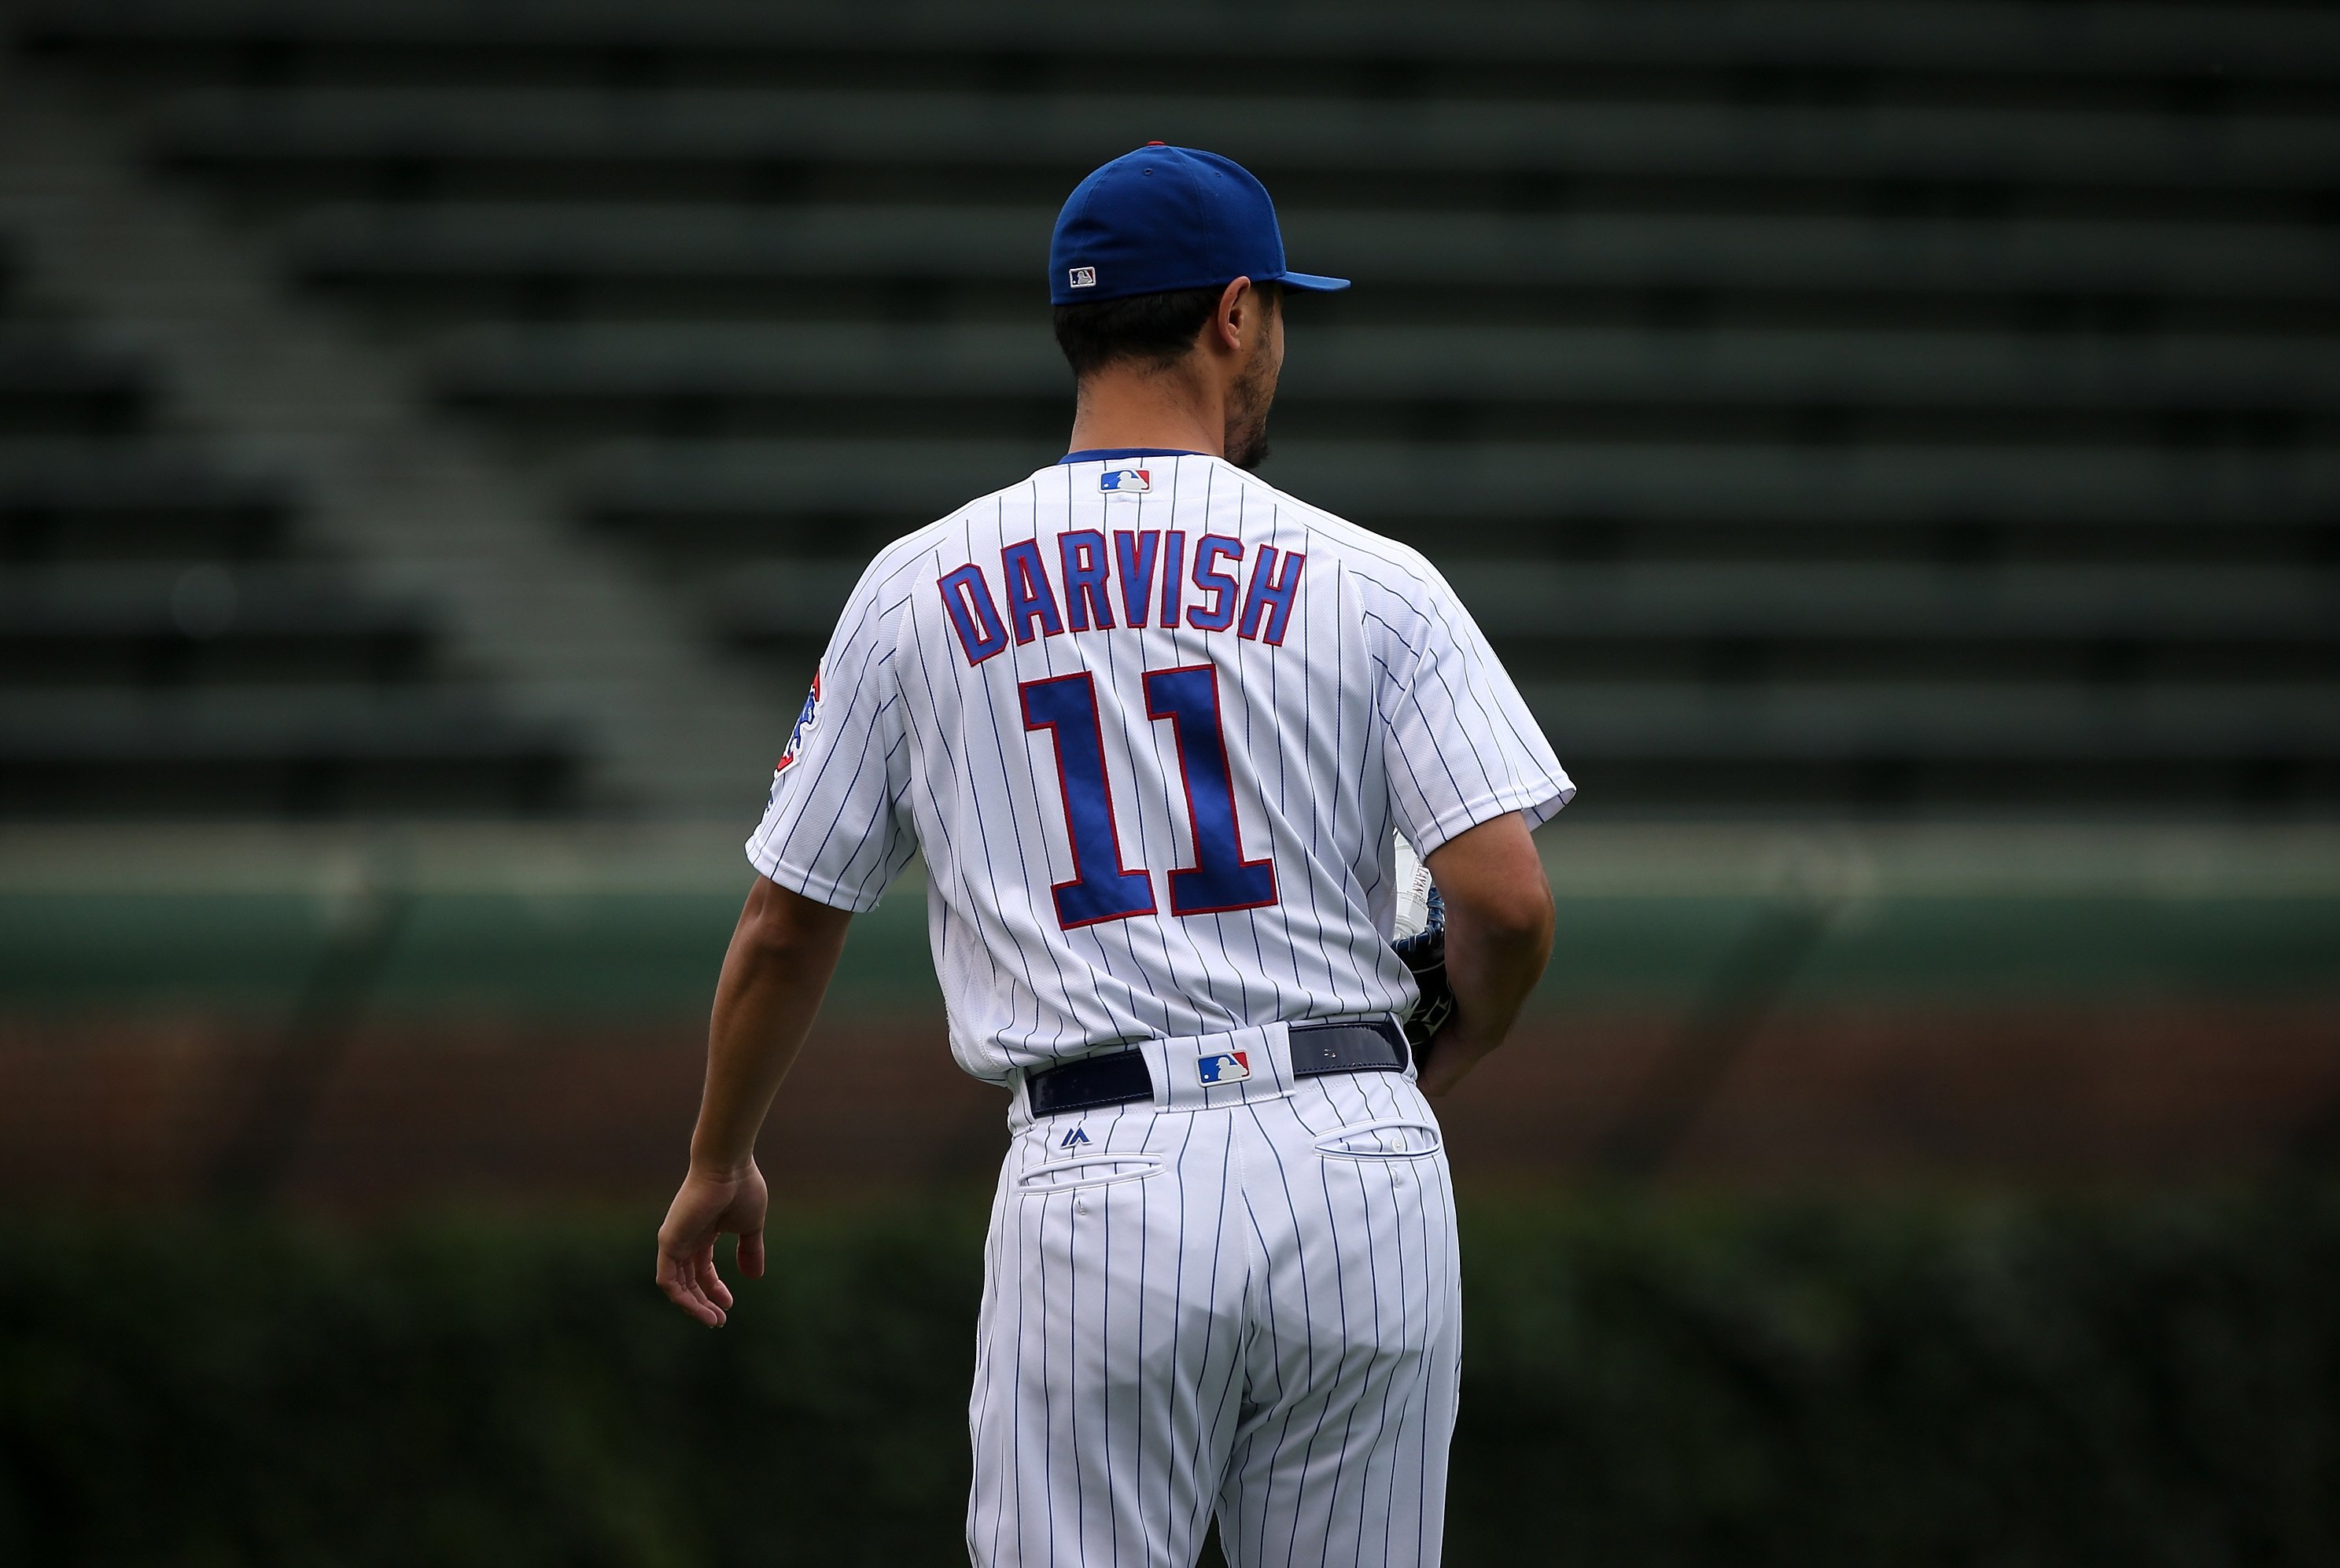 Baseball world reacts to Yu Darvish's $126 million deal with Cubs